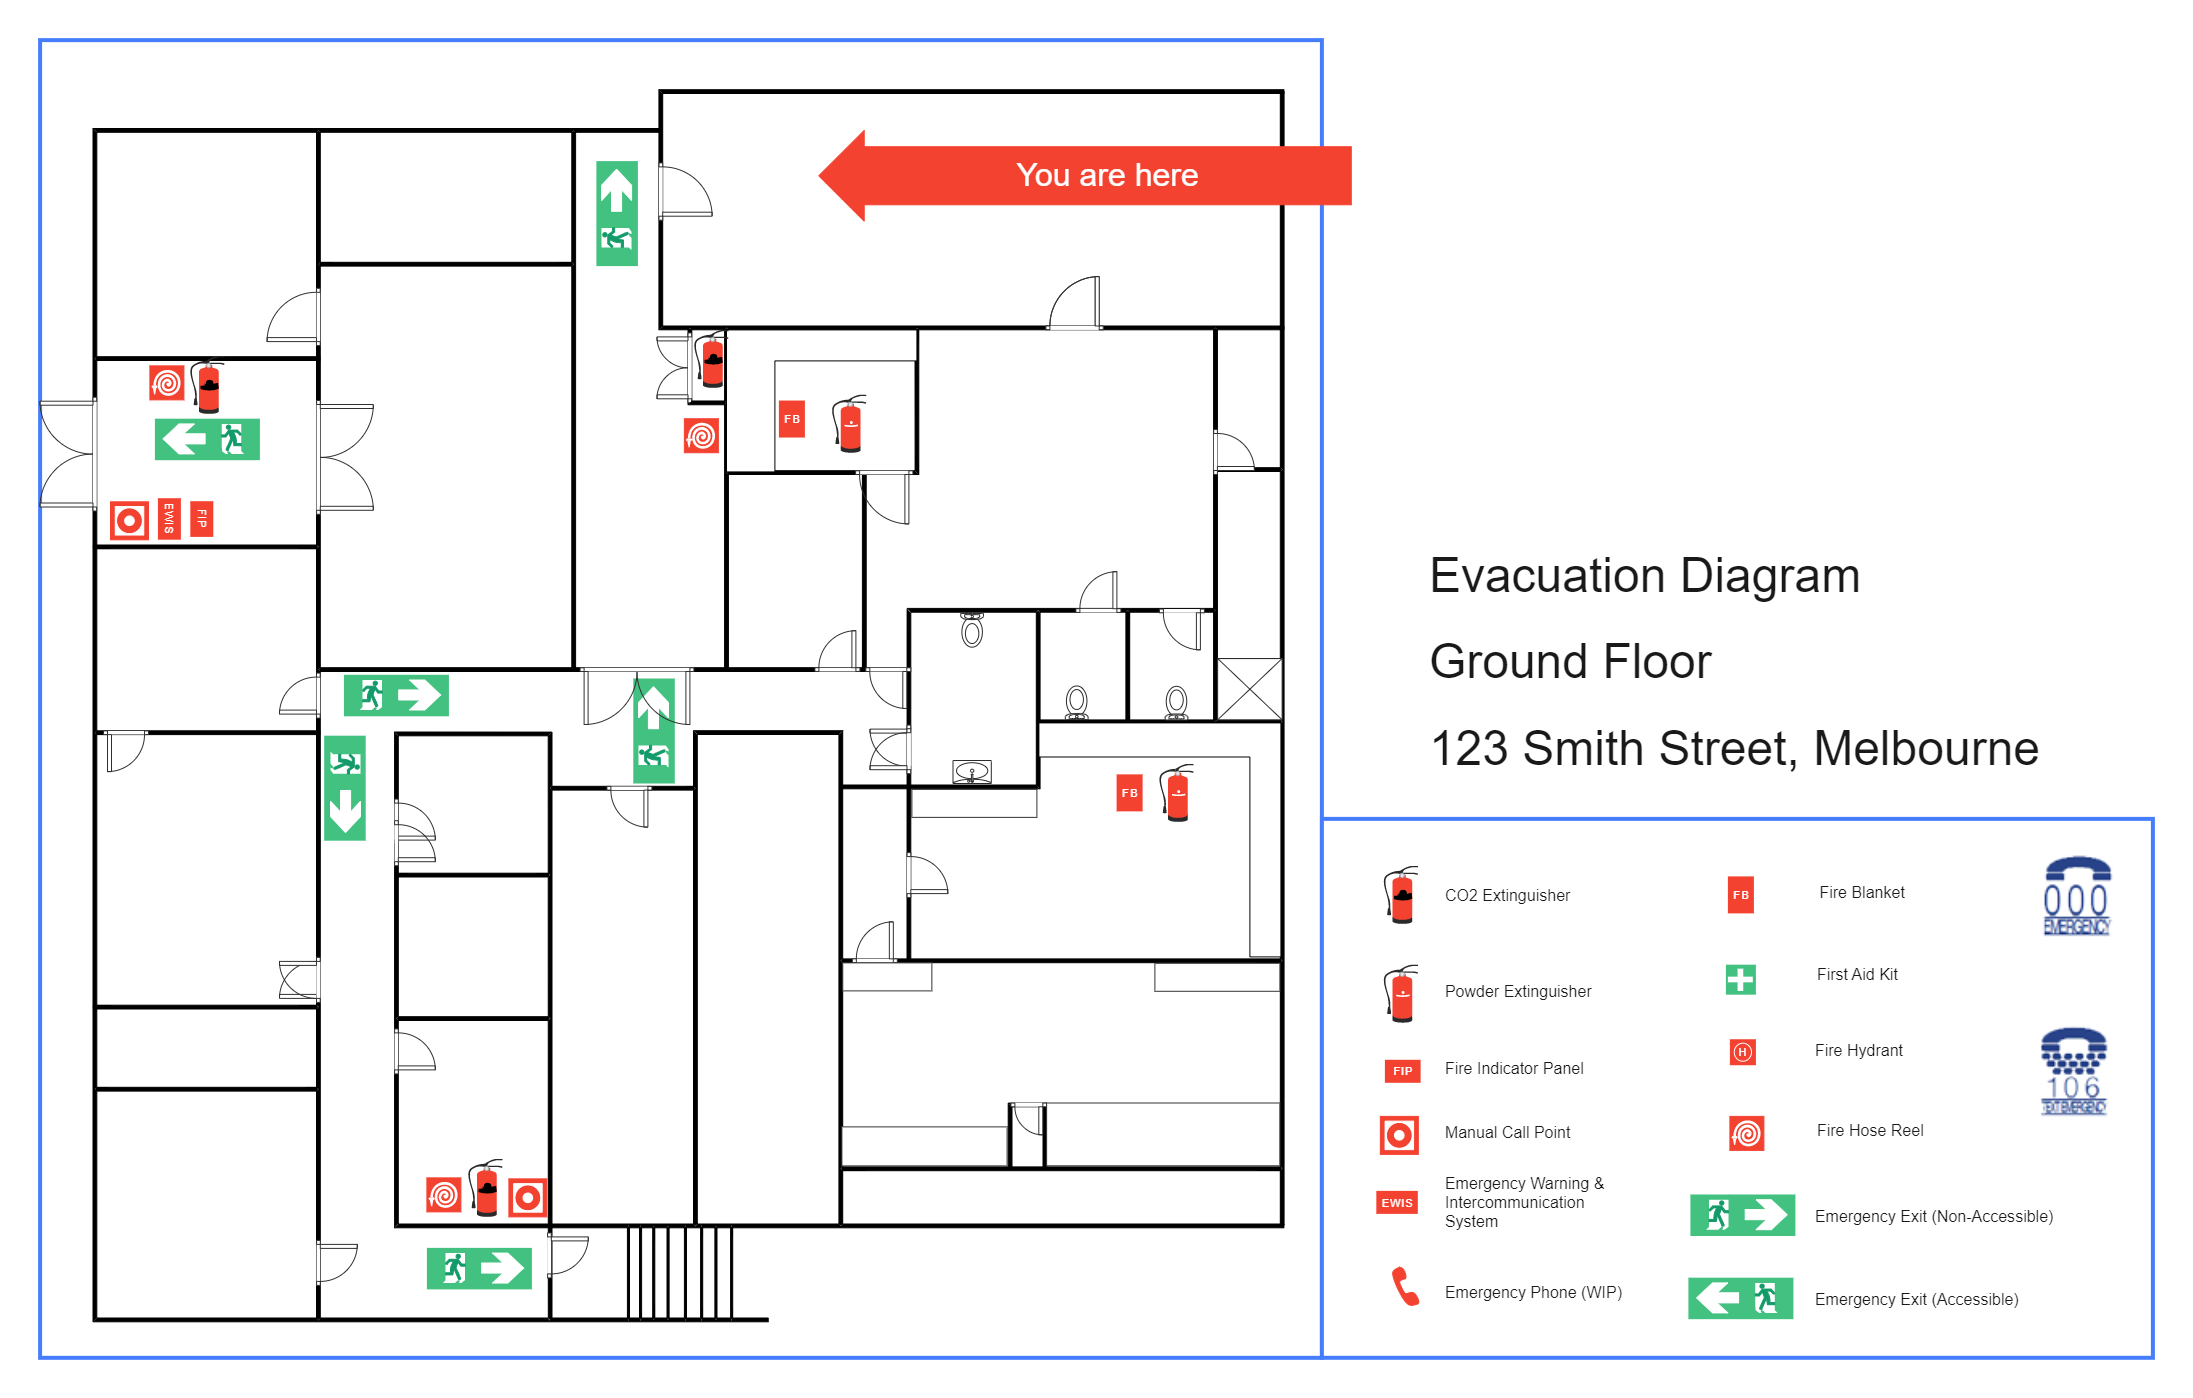 Evacuation Diagram for The Workplace